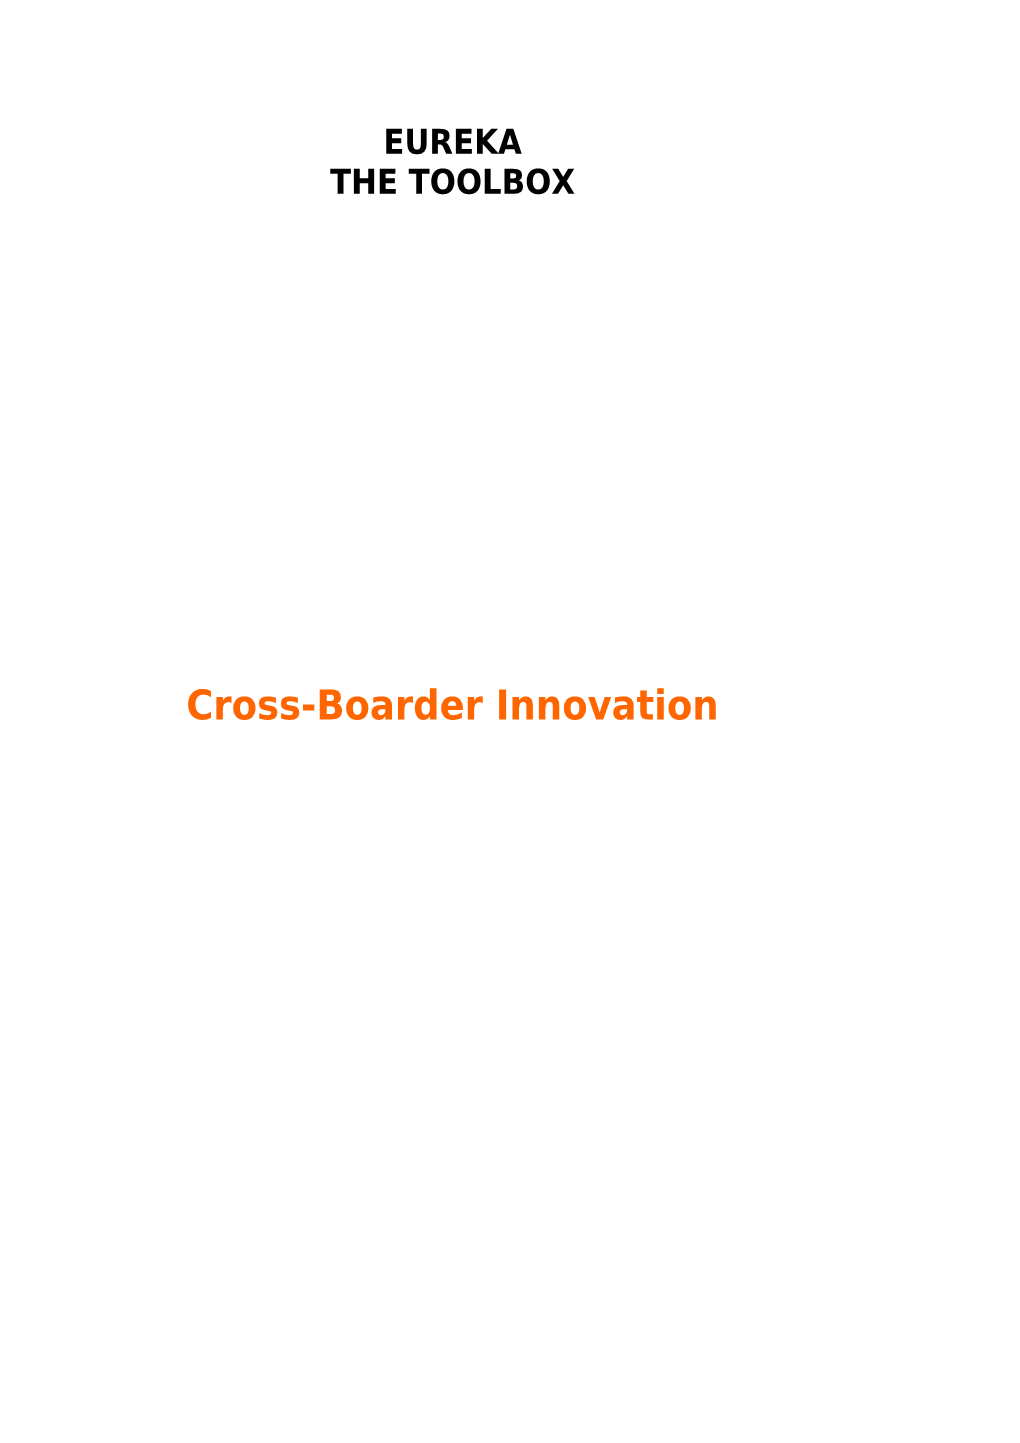 Cross-Boarder Innovation TABLE of CONTENTS